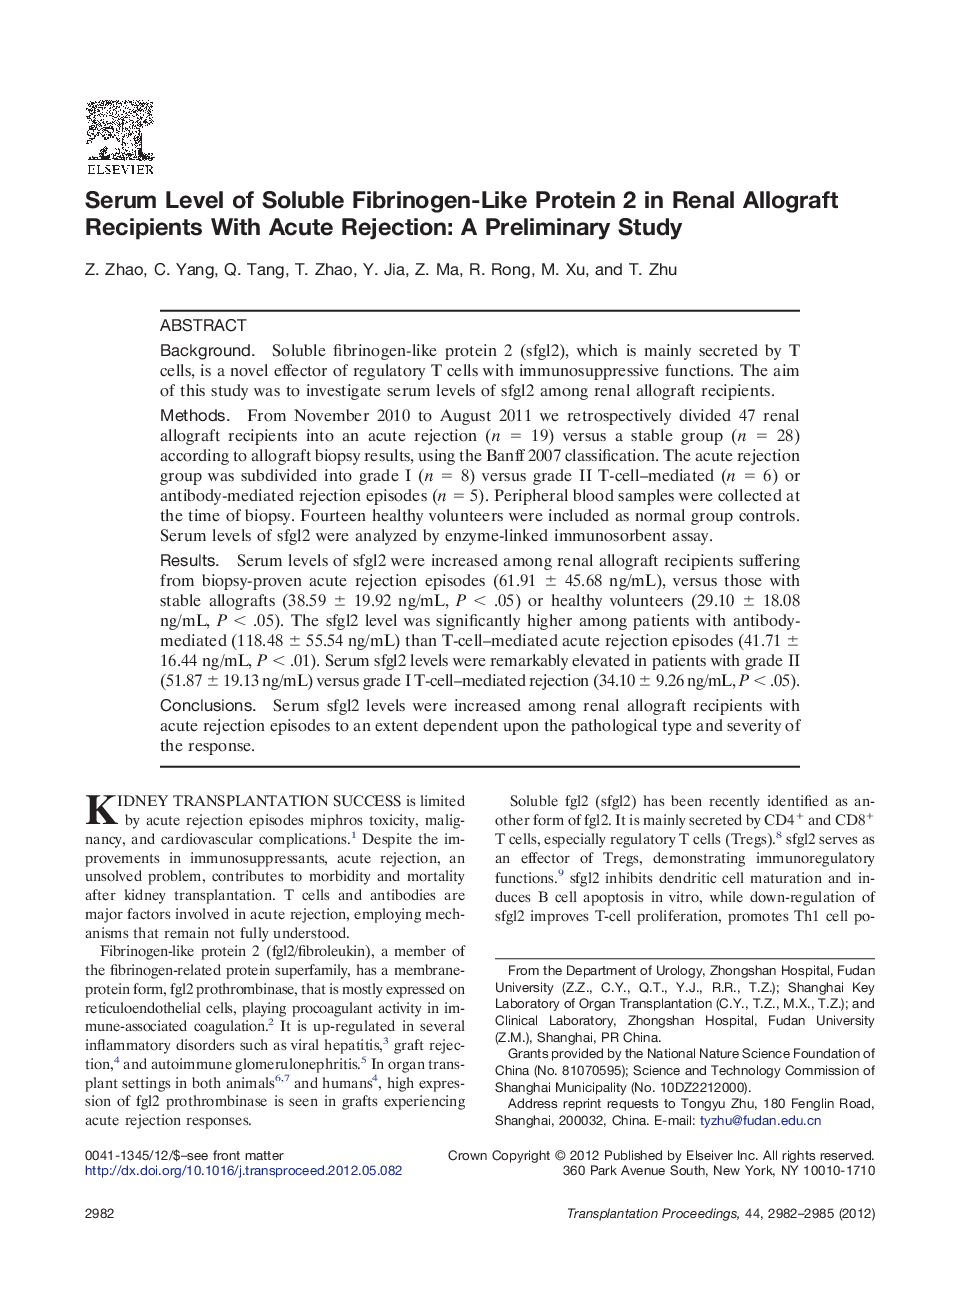 Serum Level of Soluble Fibrinogen-Like Protein 2 in Renal Allograft Recipients With Acute Rejection: A Preliminary Study 